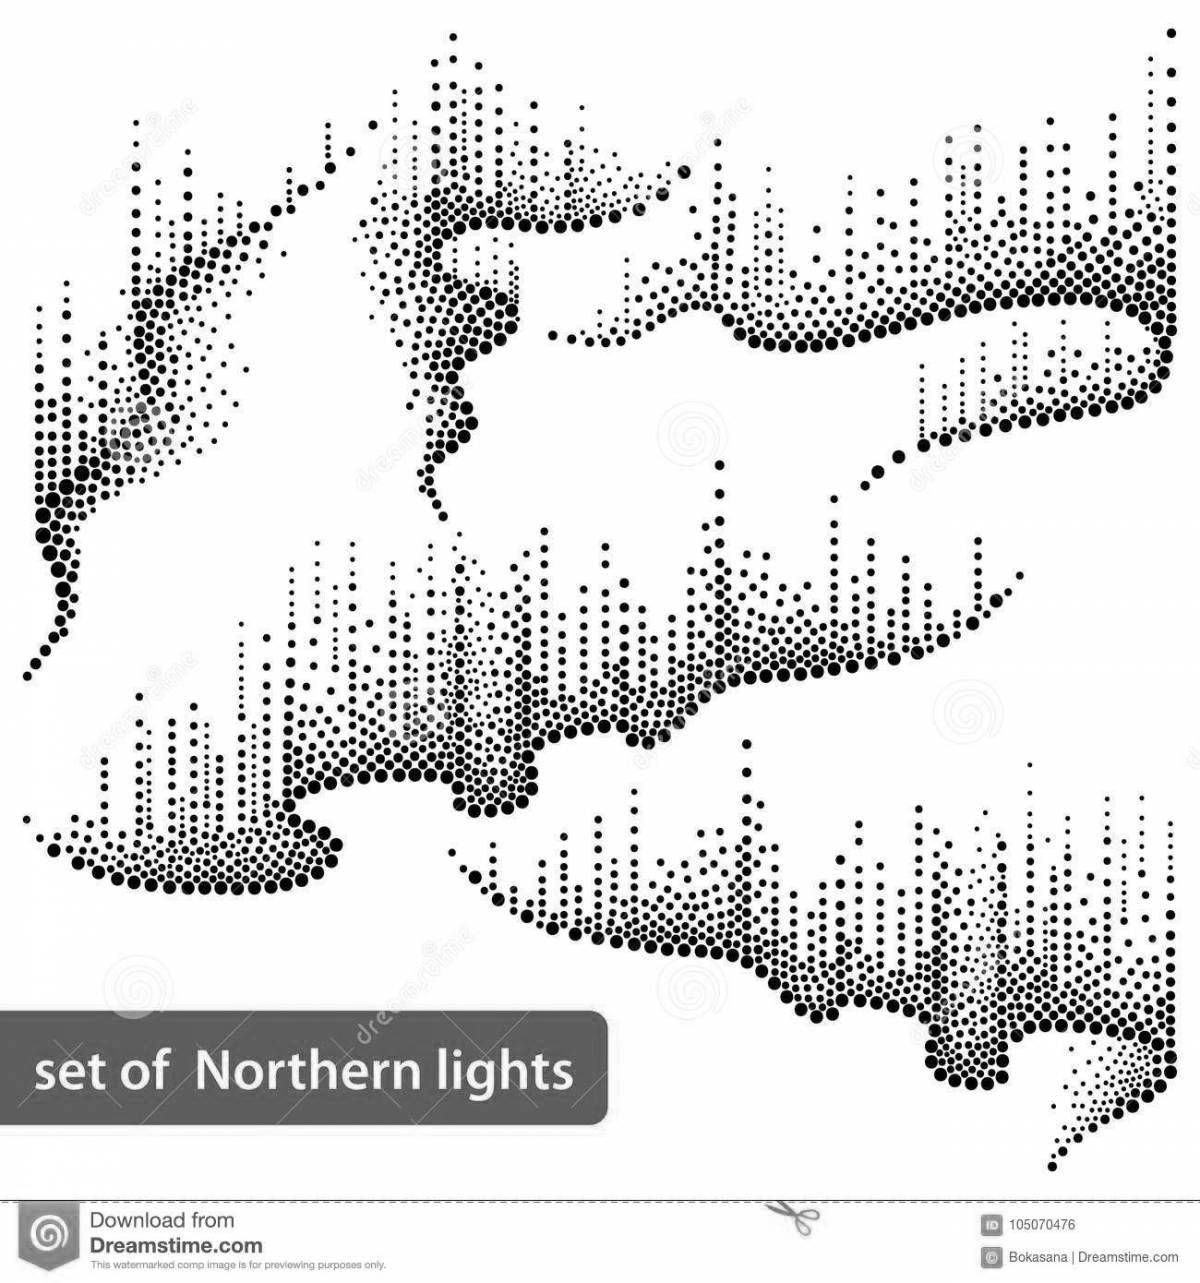 Awesome northern lights coloring book for kids